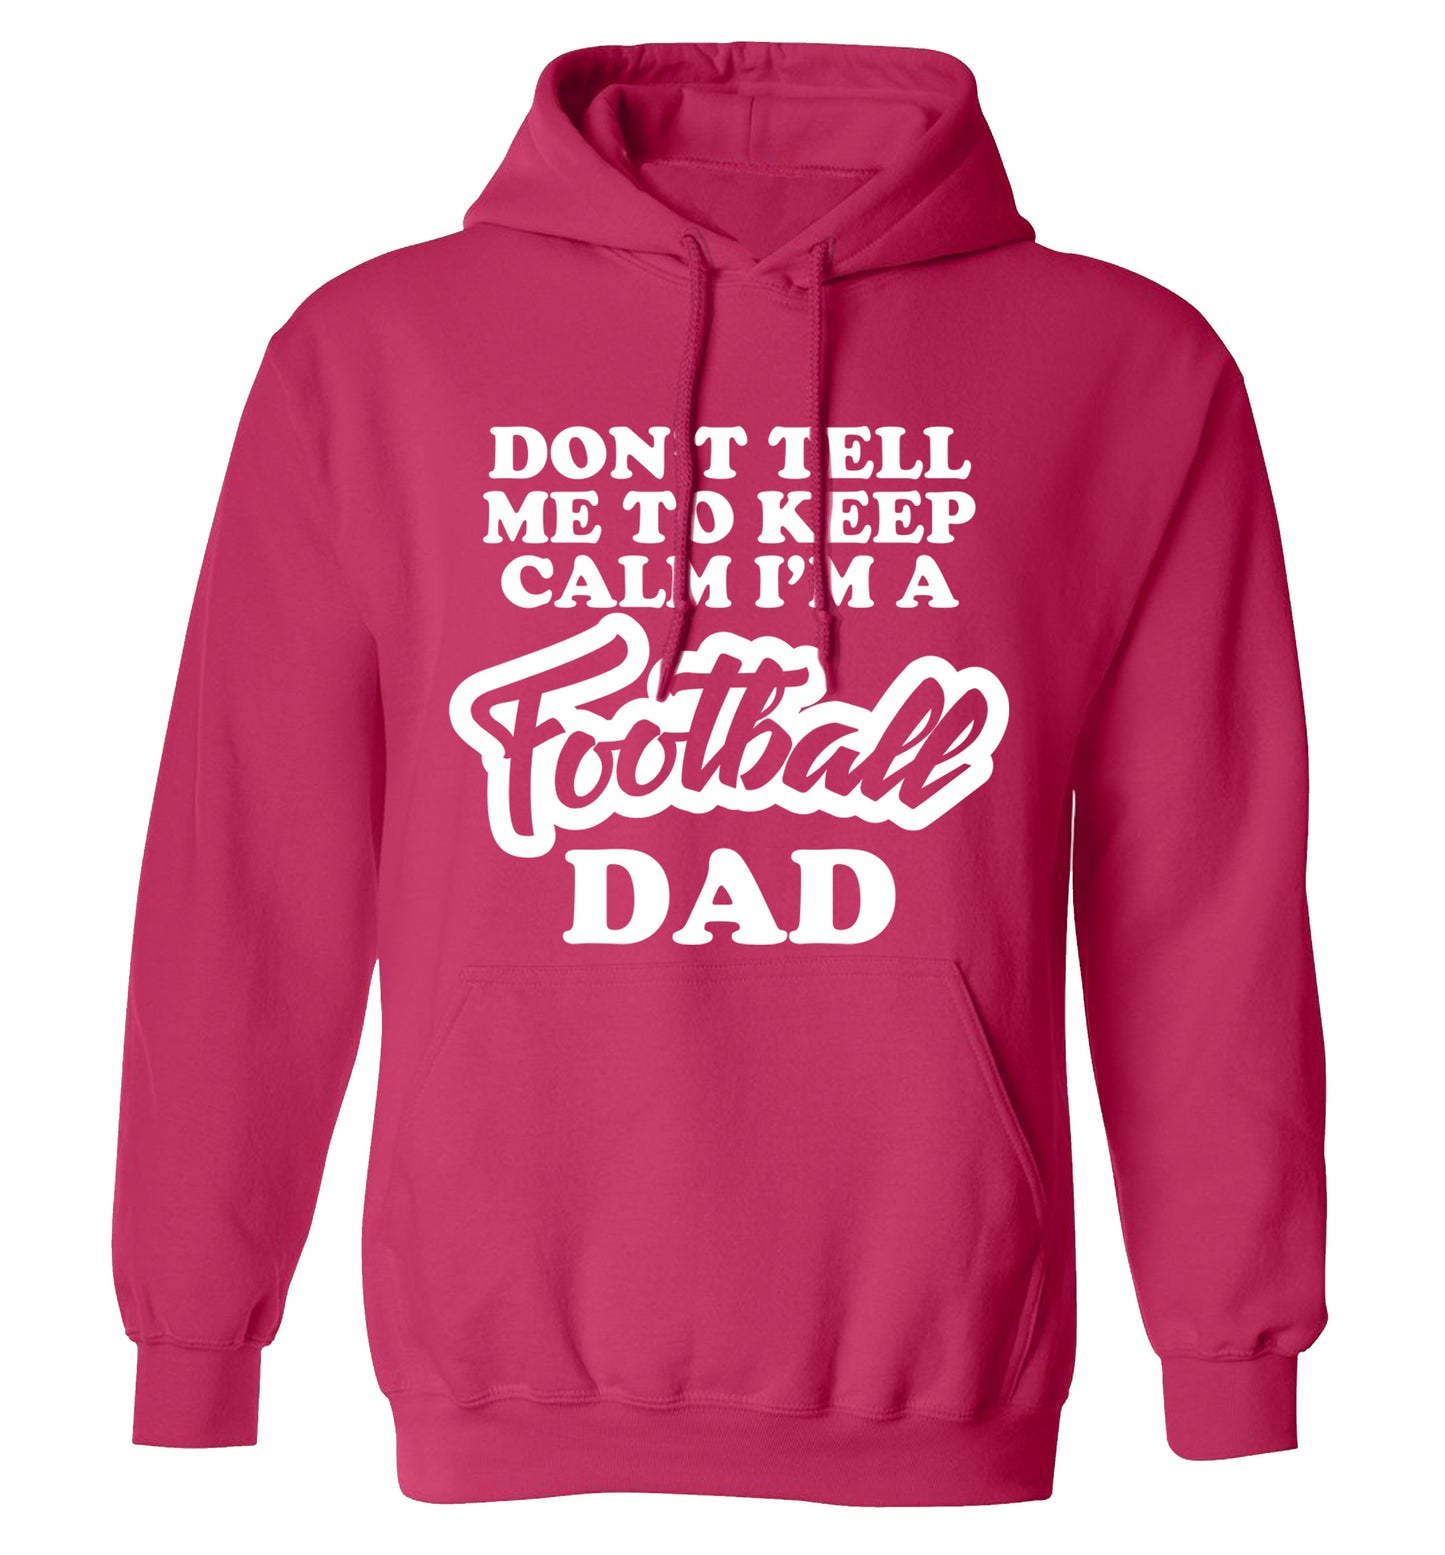 Don't tell me to keep calm I'm a football dad adults unisexpink hoodie 2XL